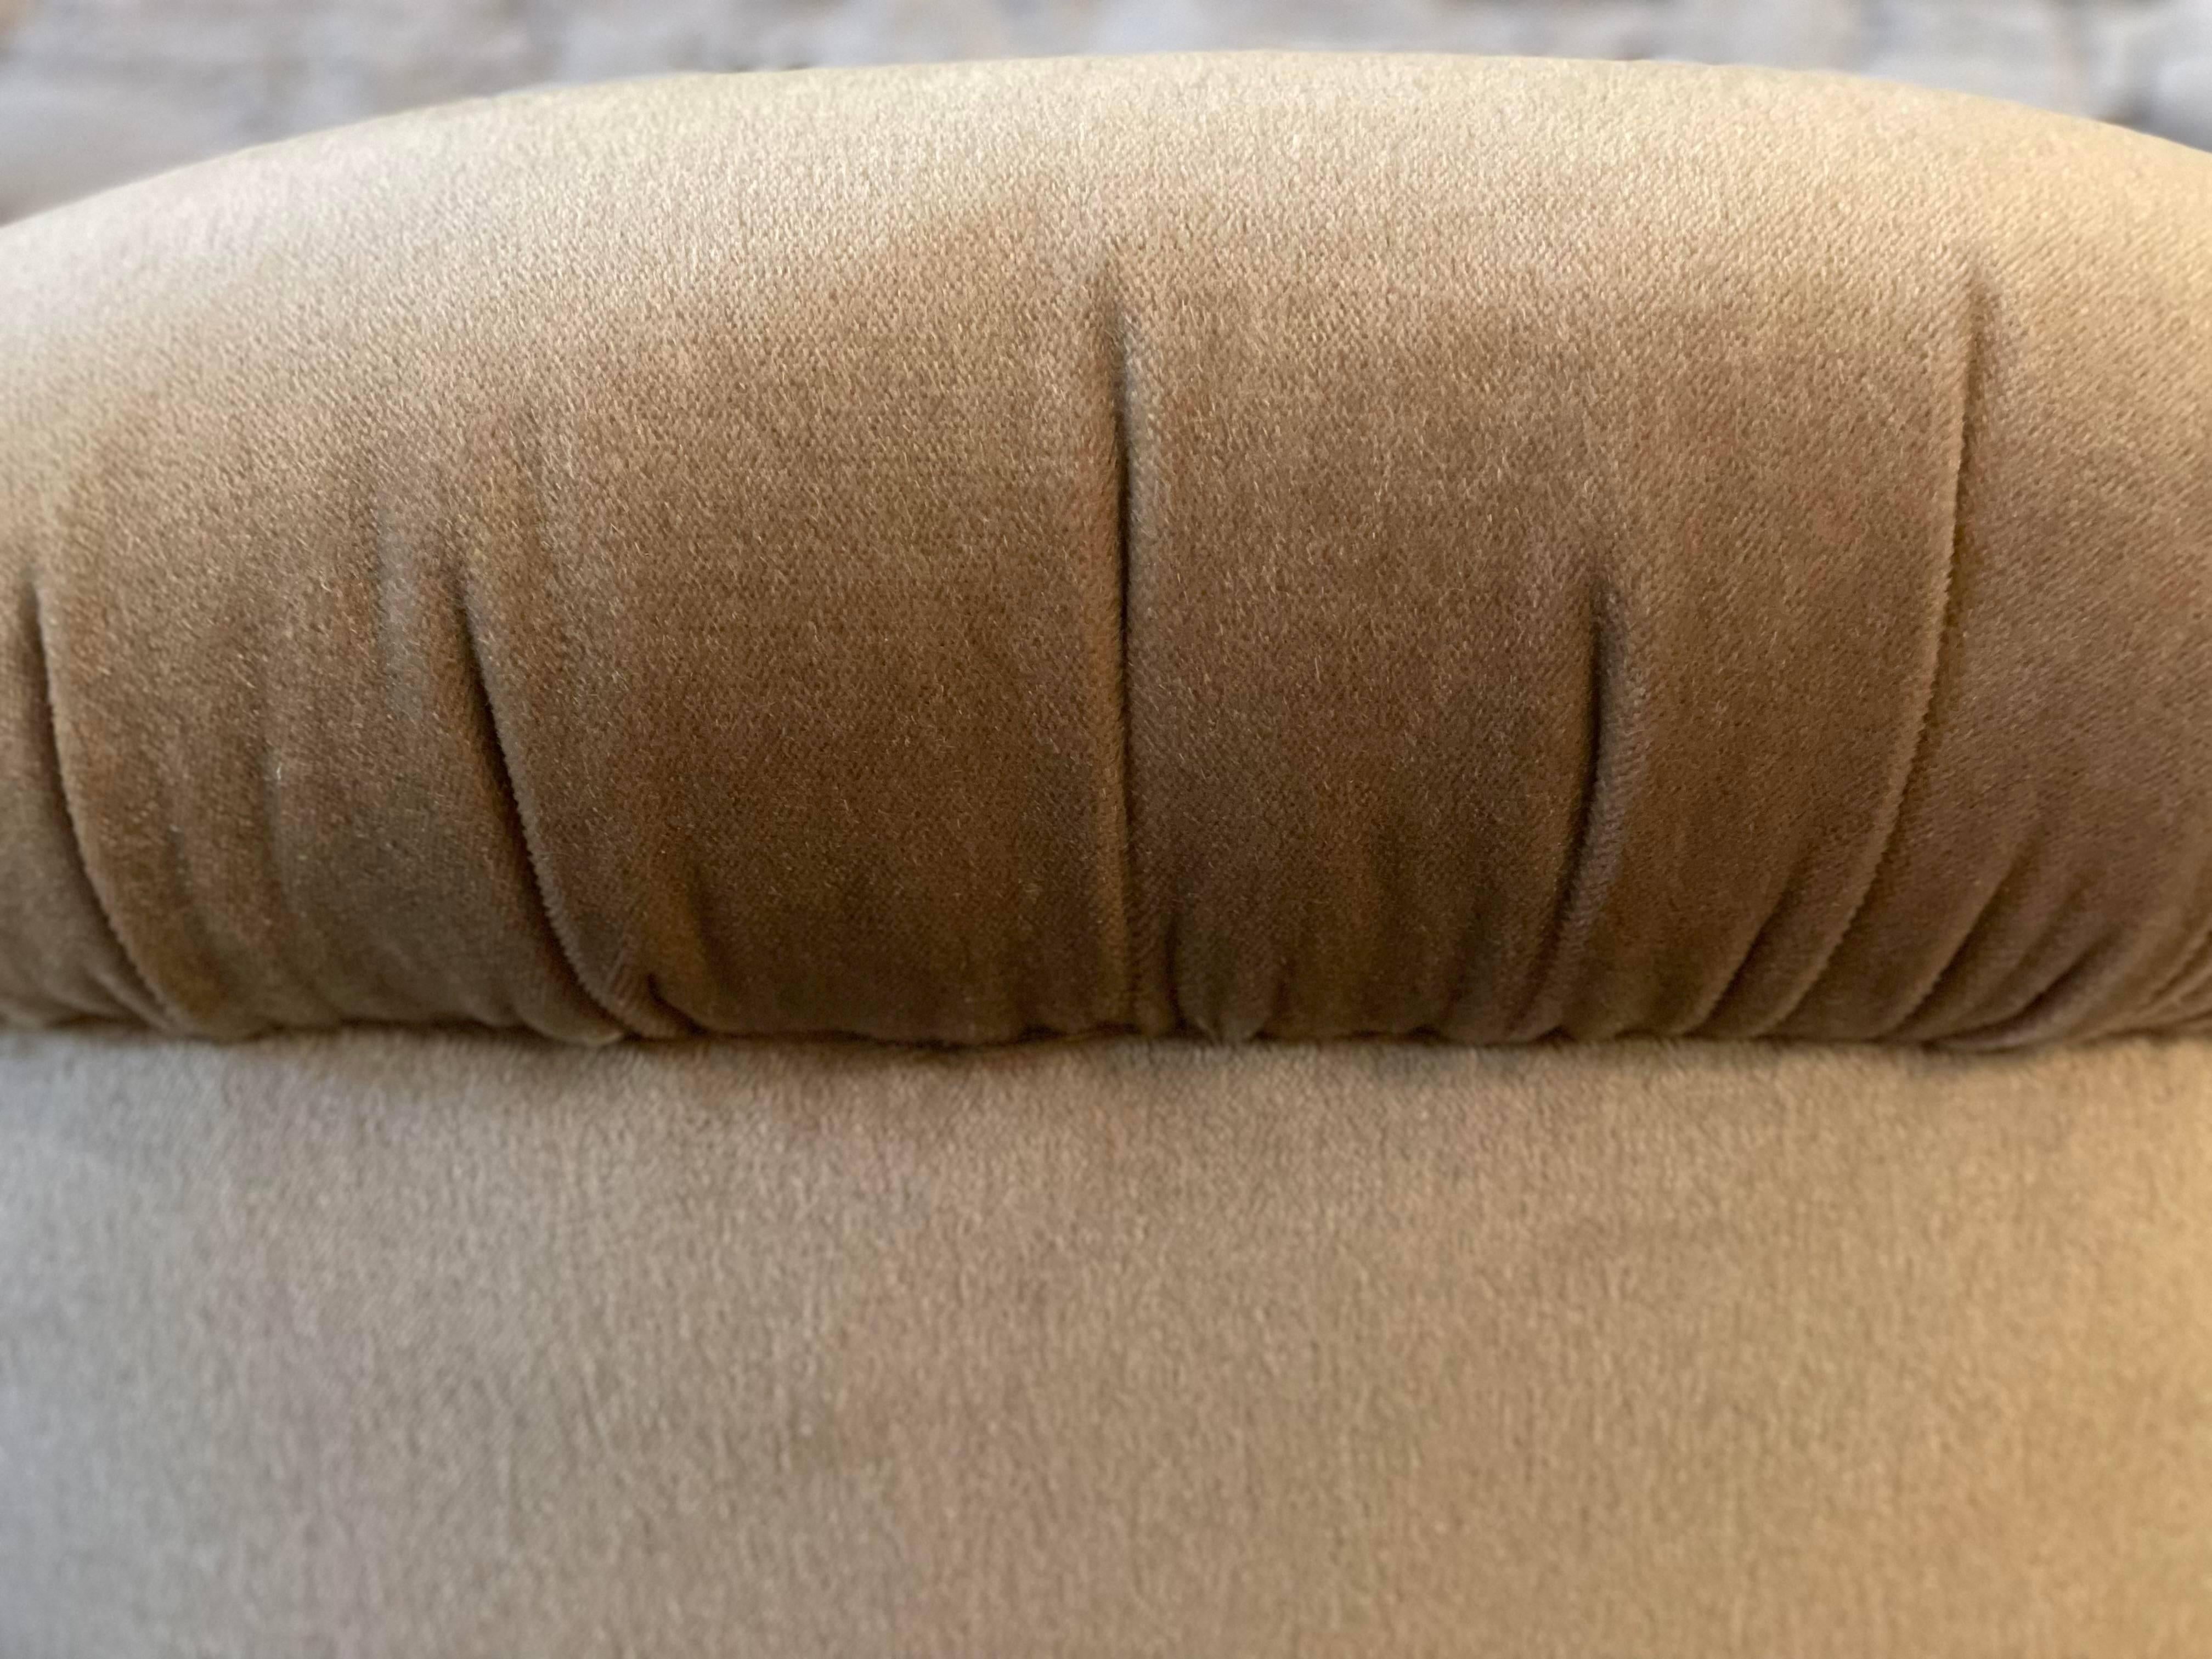 Post-Modern 1980s Postmodern Arc Sculptural Chairs in Camel Mohair, a Pair For Sale